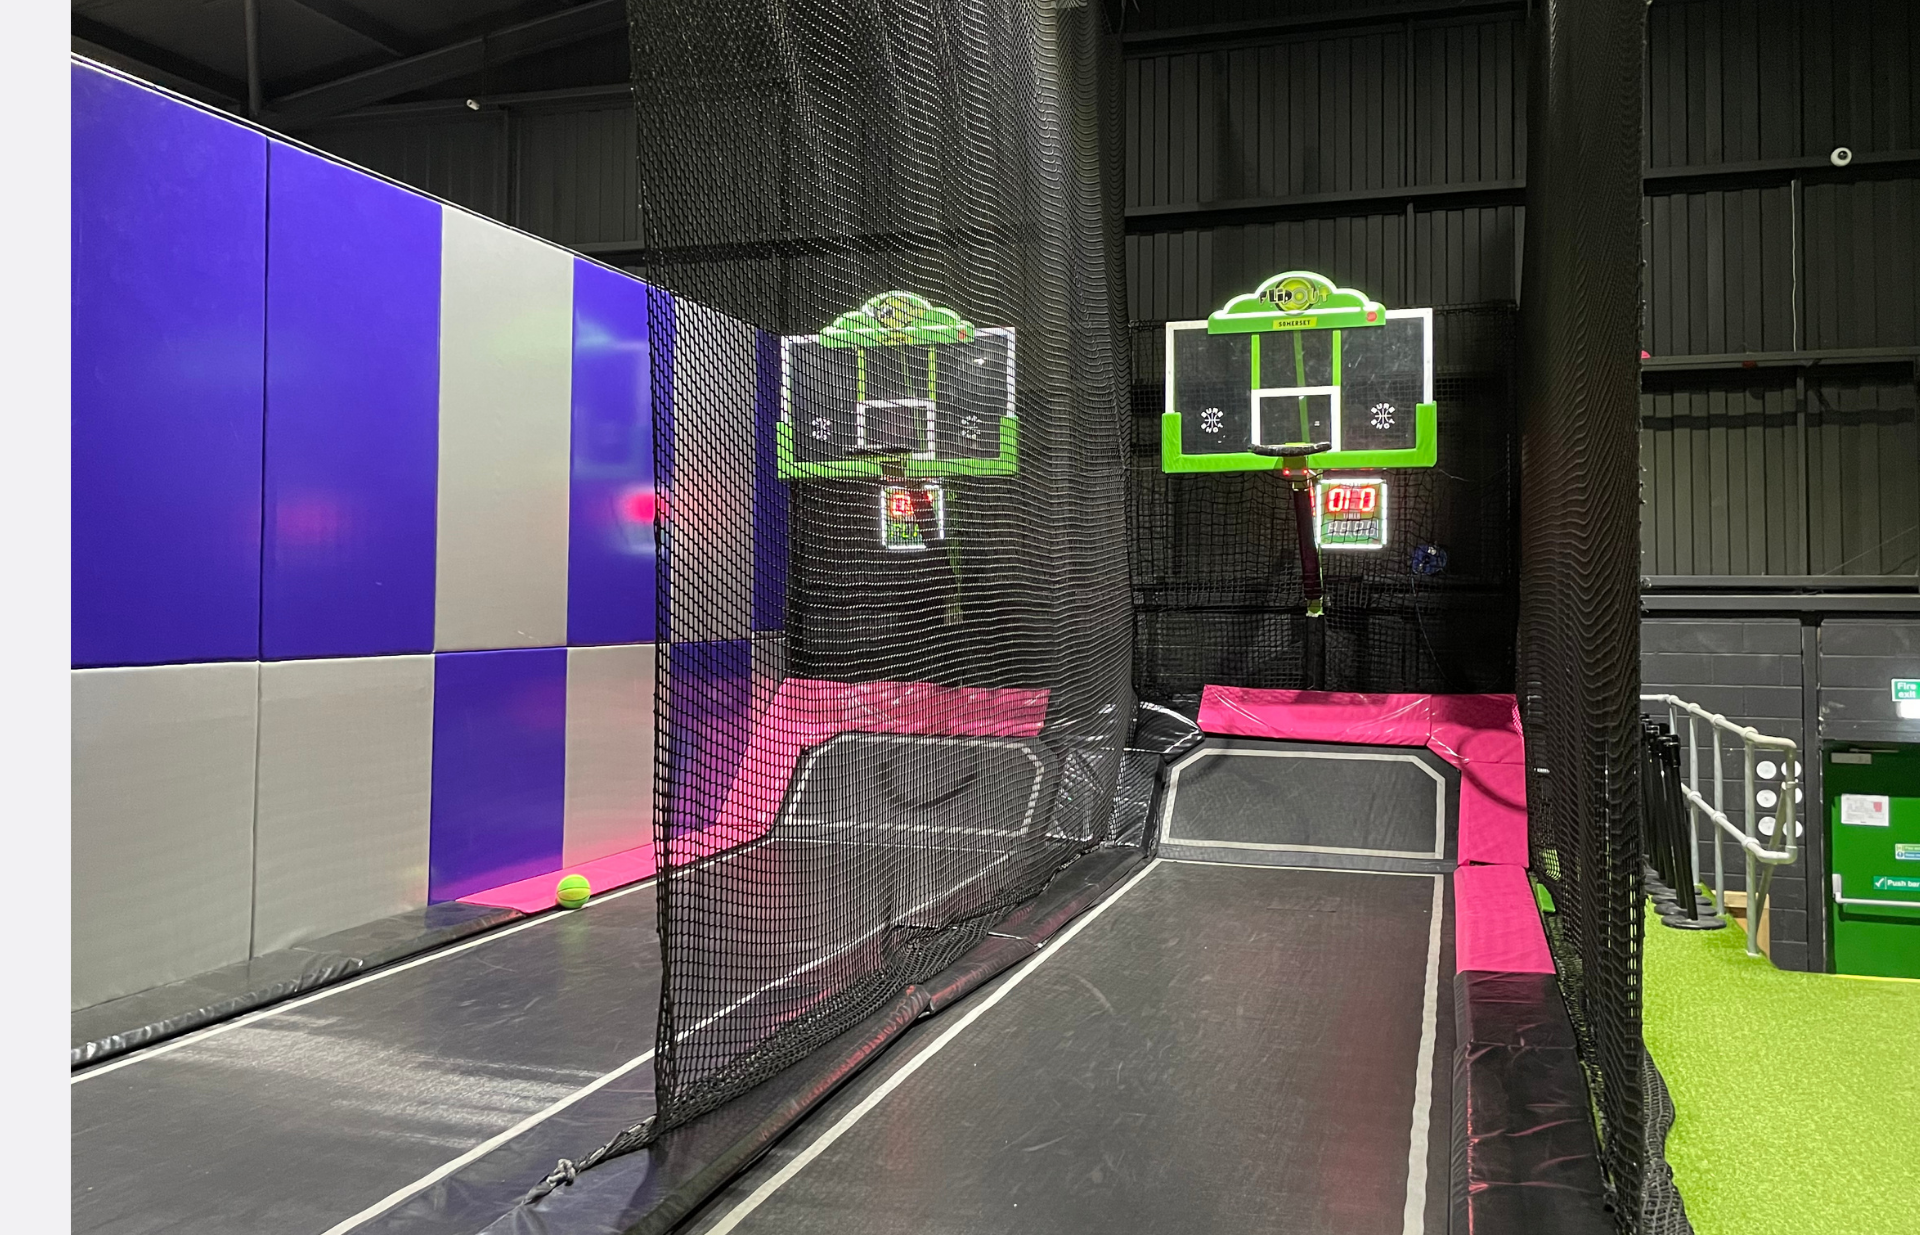 Interactive basketball hoops. Are you ready to do battle?